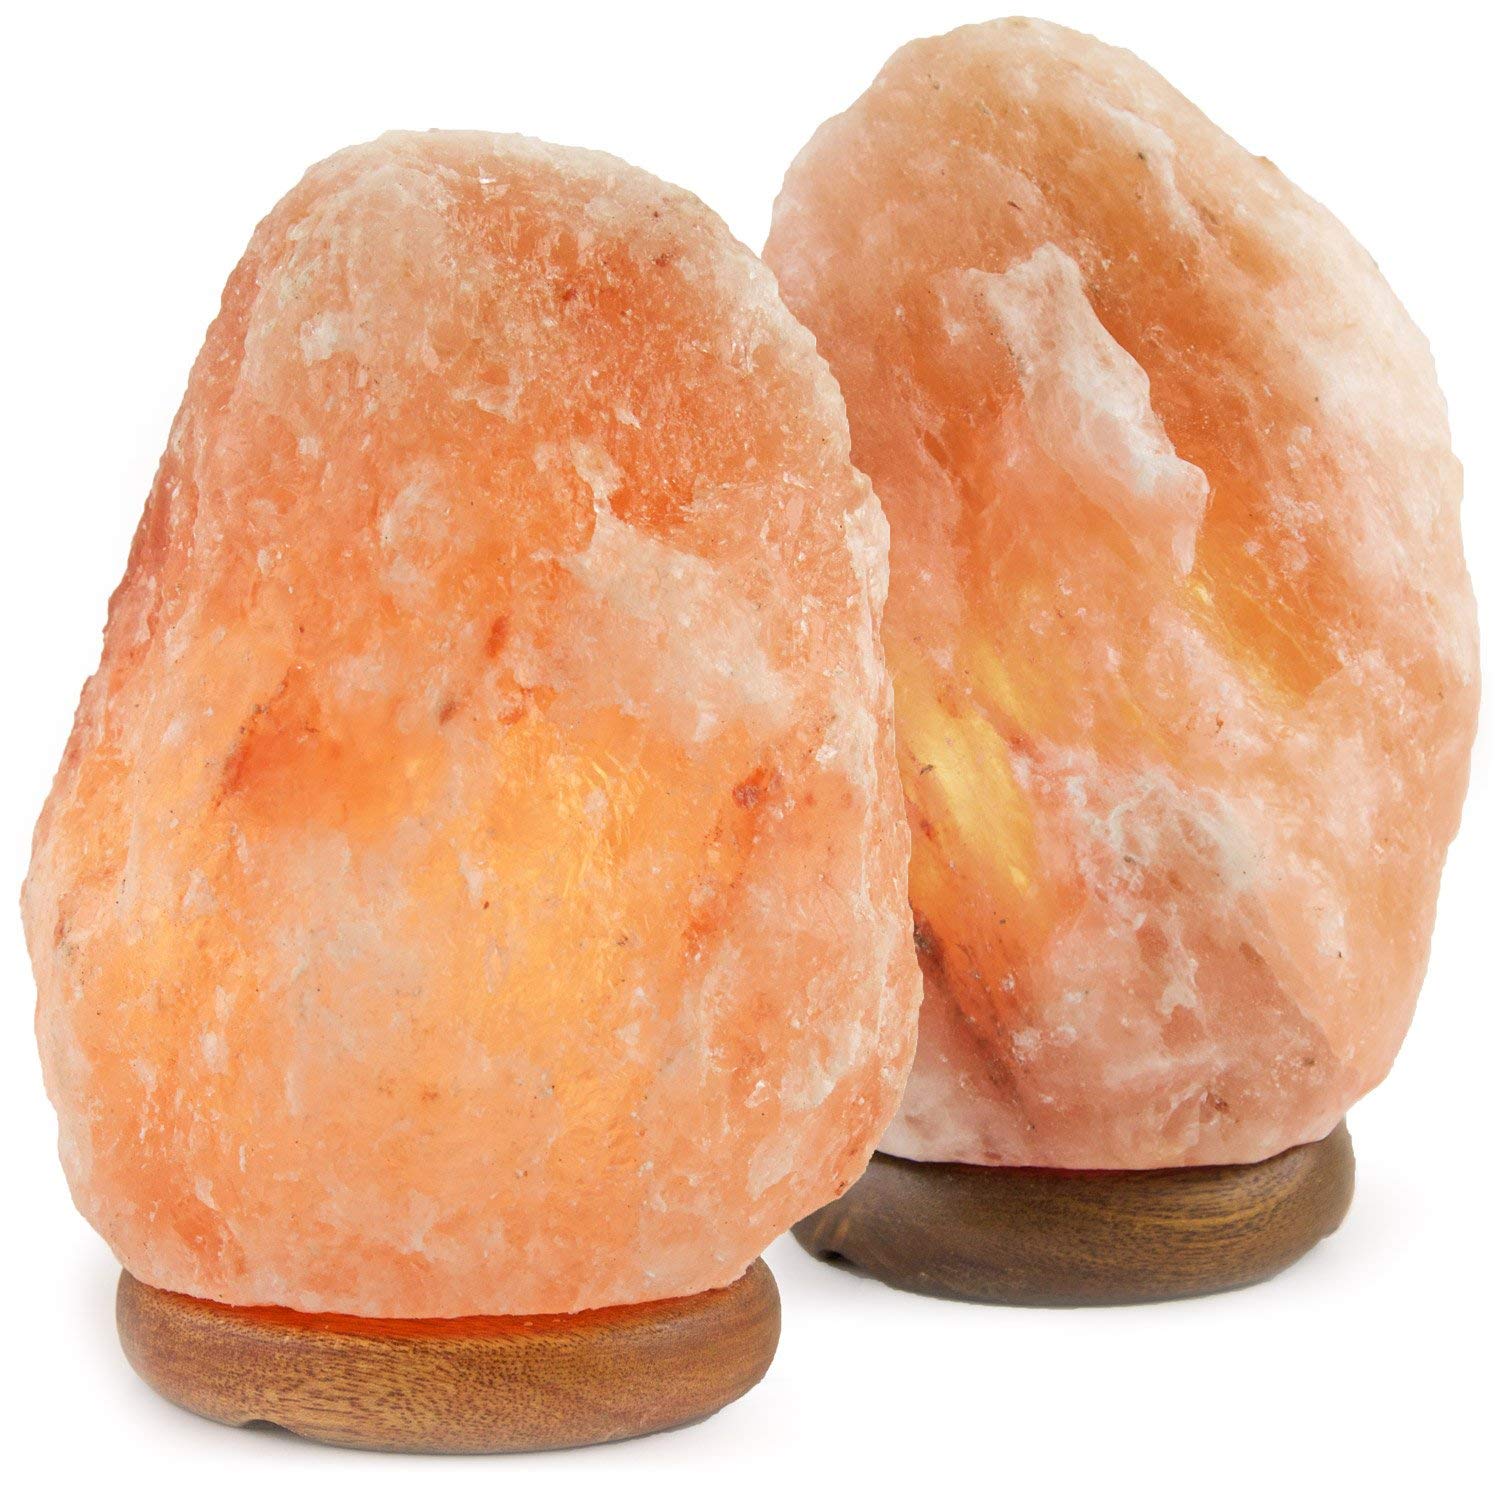 Crystal Allies Gallery CA SLS-S-2pc Crystal Allies: Set of 2 Natural 5-8 lbs Himalayan Salt Lamp with Dimmable Switch and 6' UL-Listed Cord, 4" x 4" x 6"